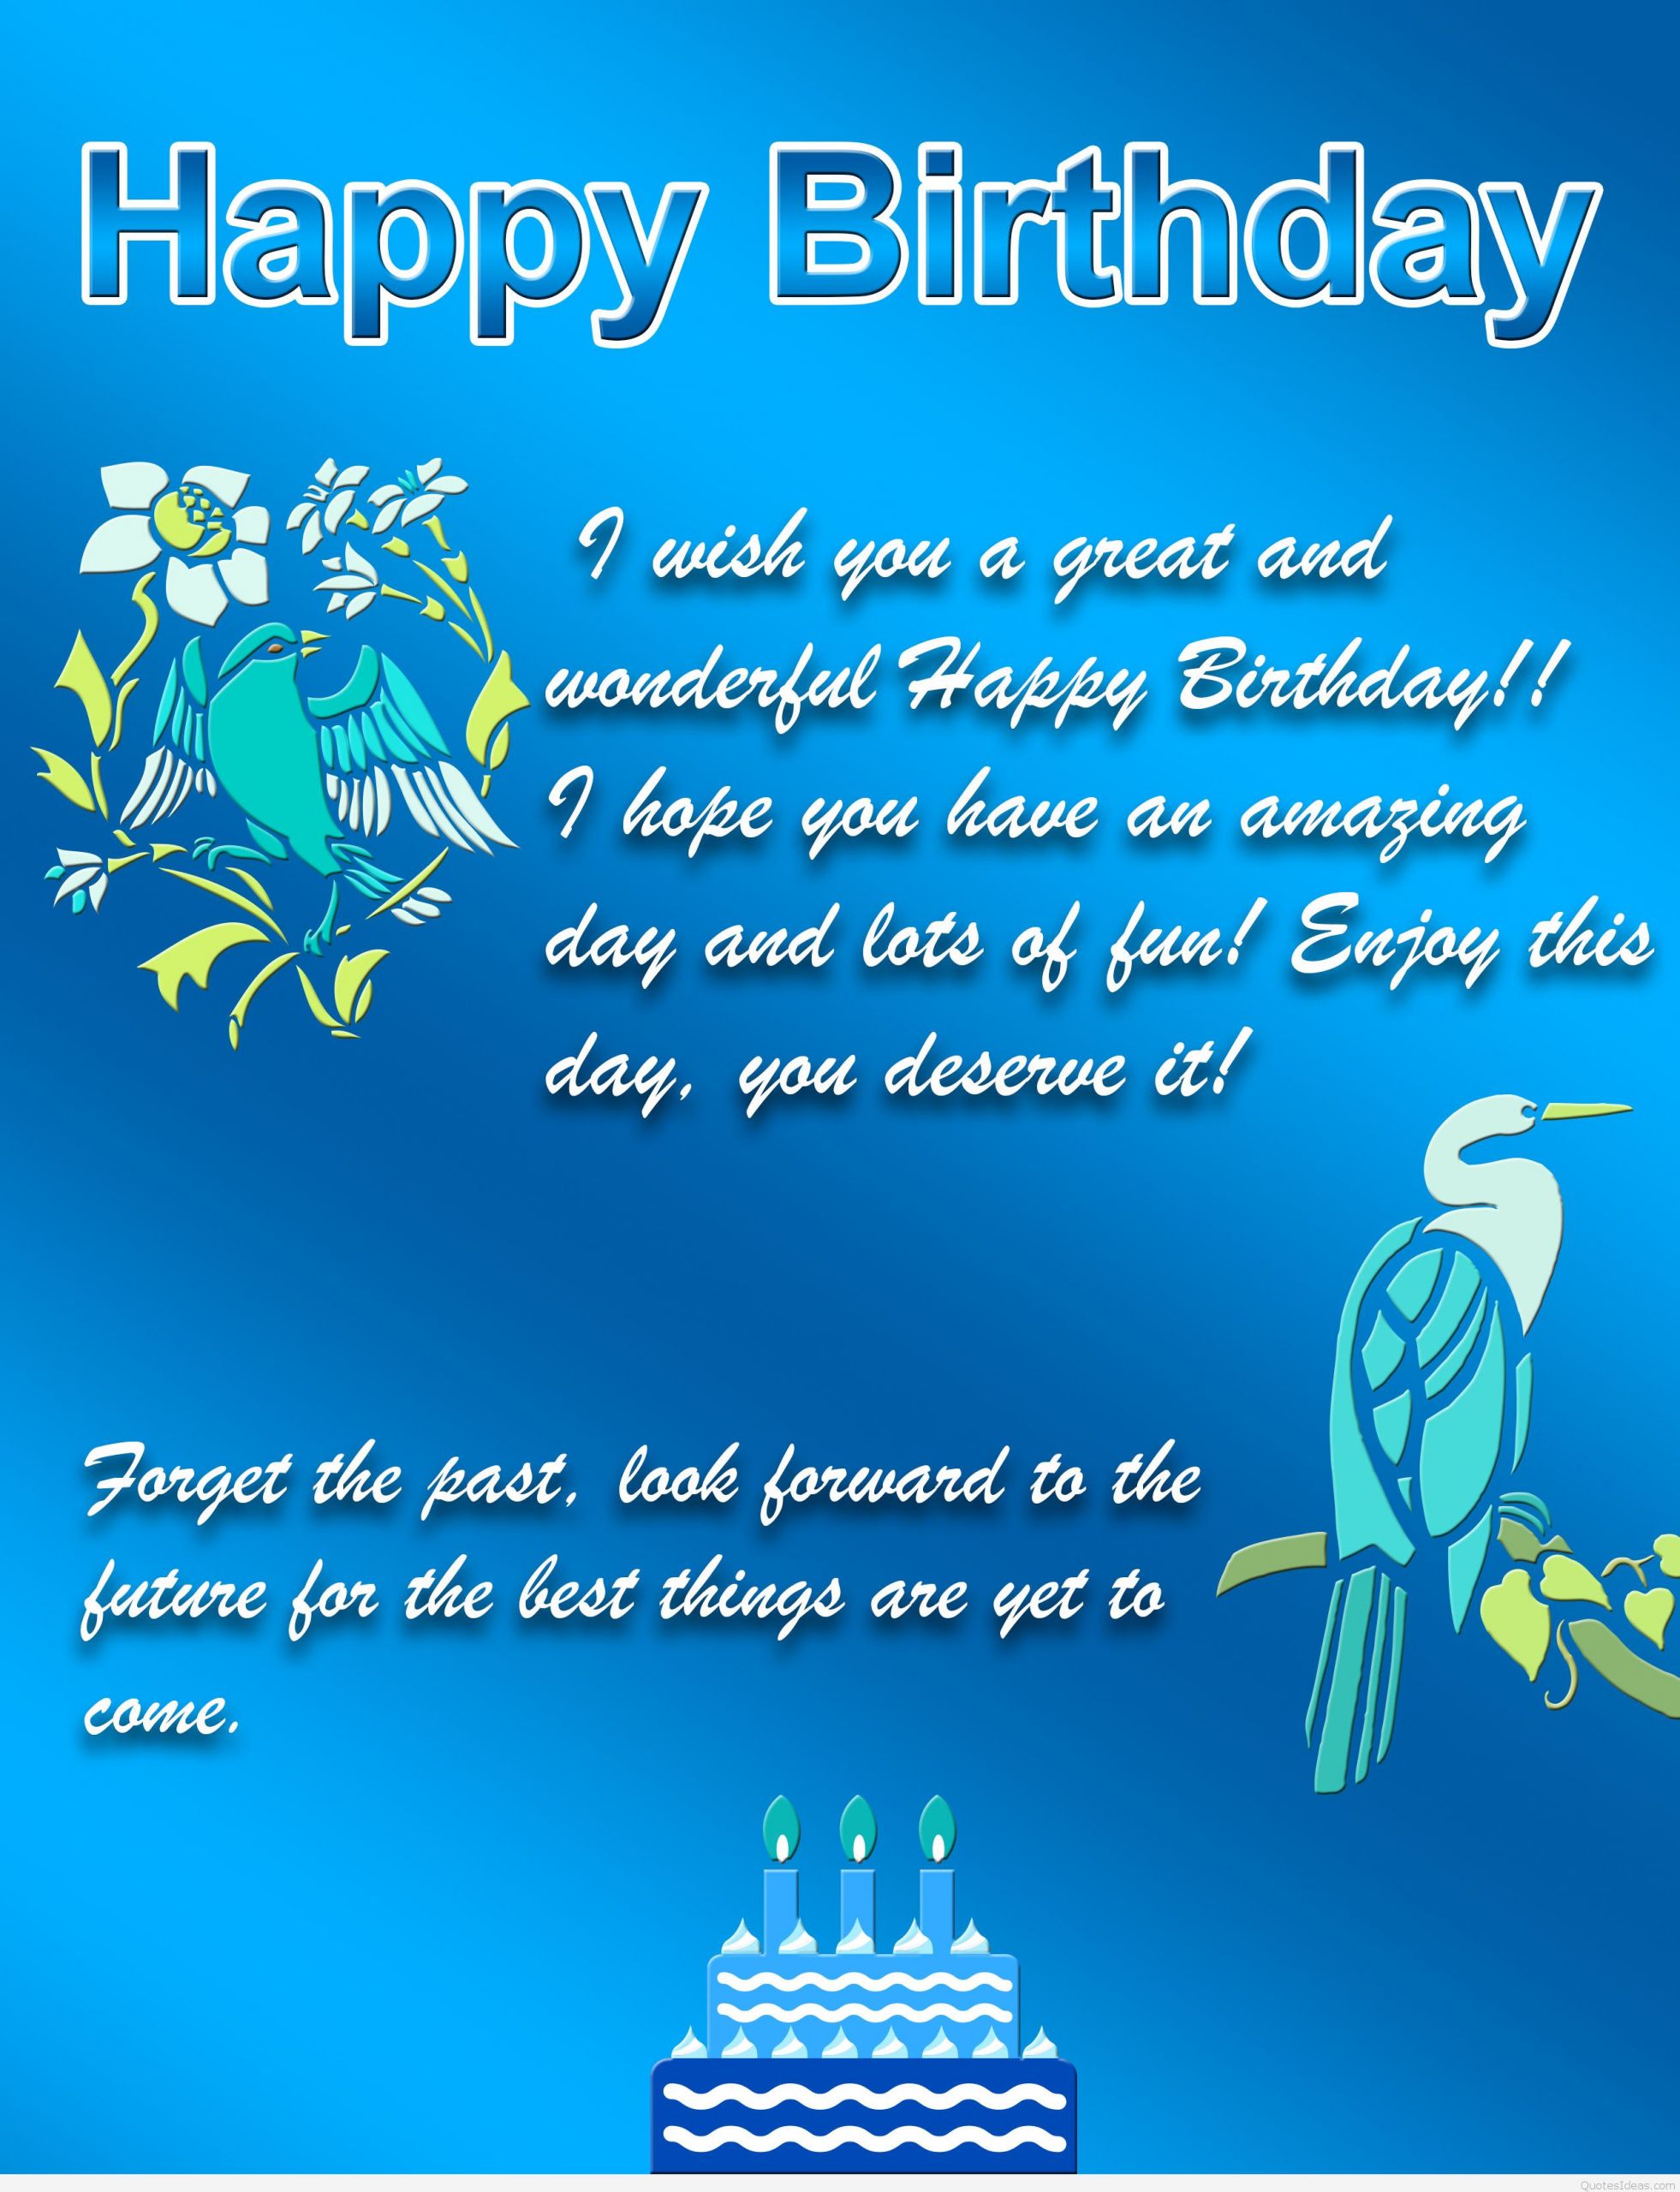 Quote For Birthday Card
 ecards quotes fun